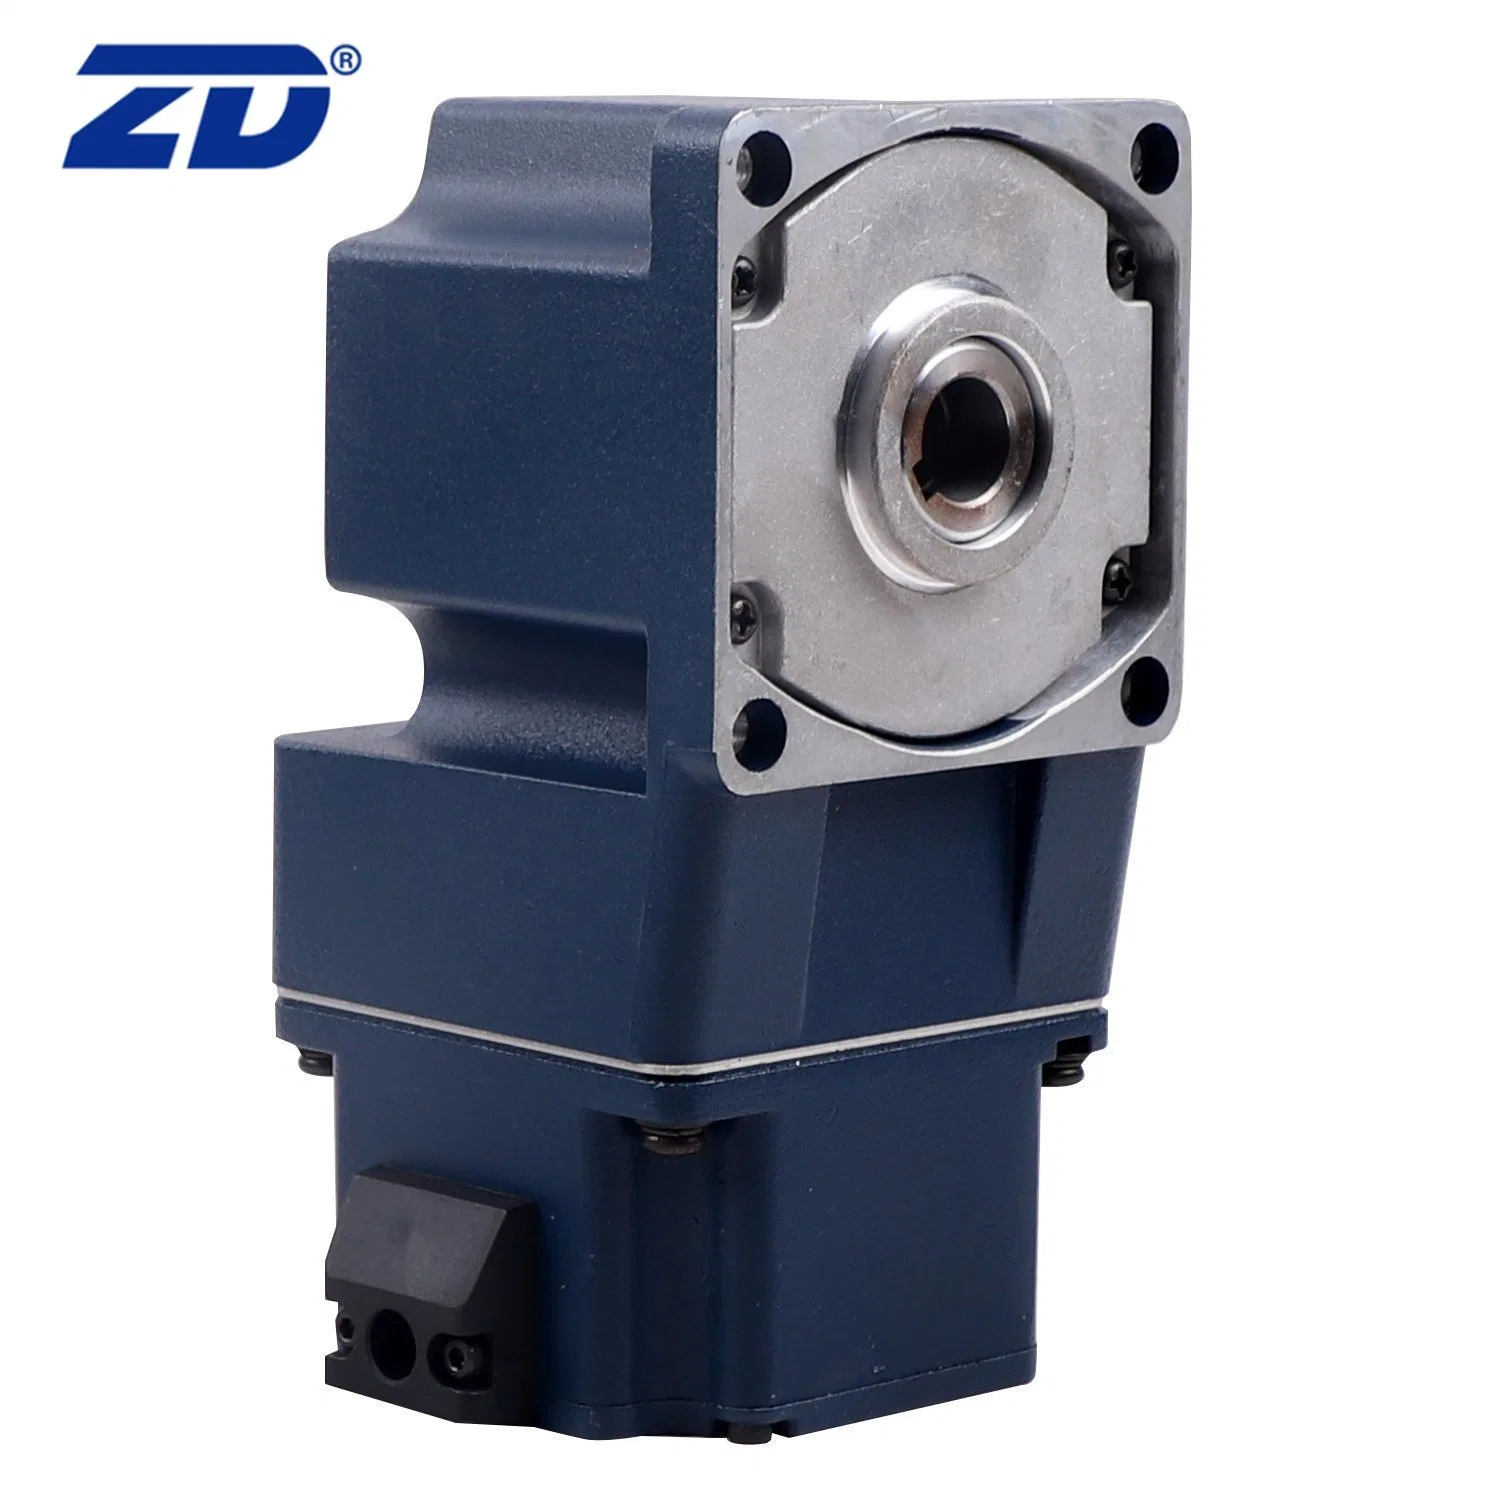 ZD Right Angle Spiral Bevel Hollow Shaft 24-48V Electric Brushless DC Gear Motor